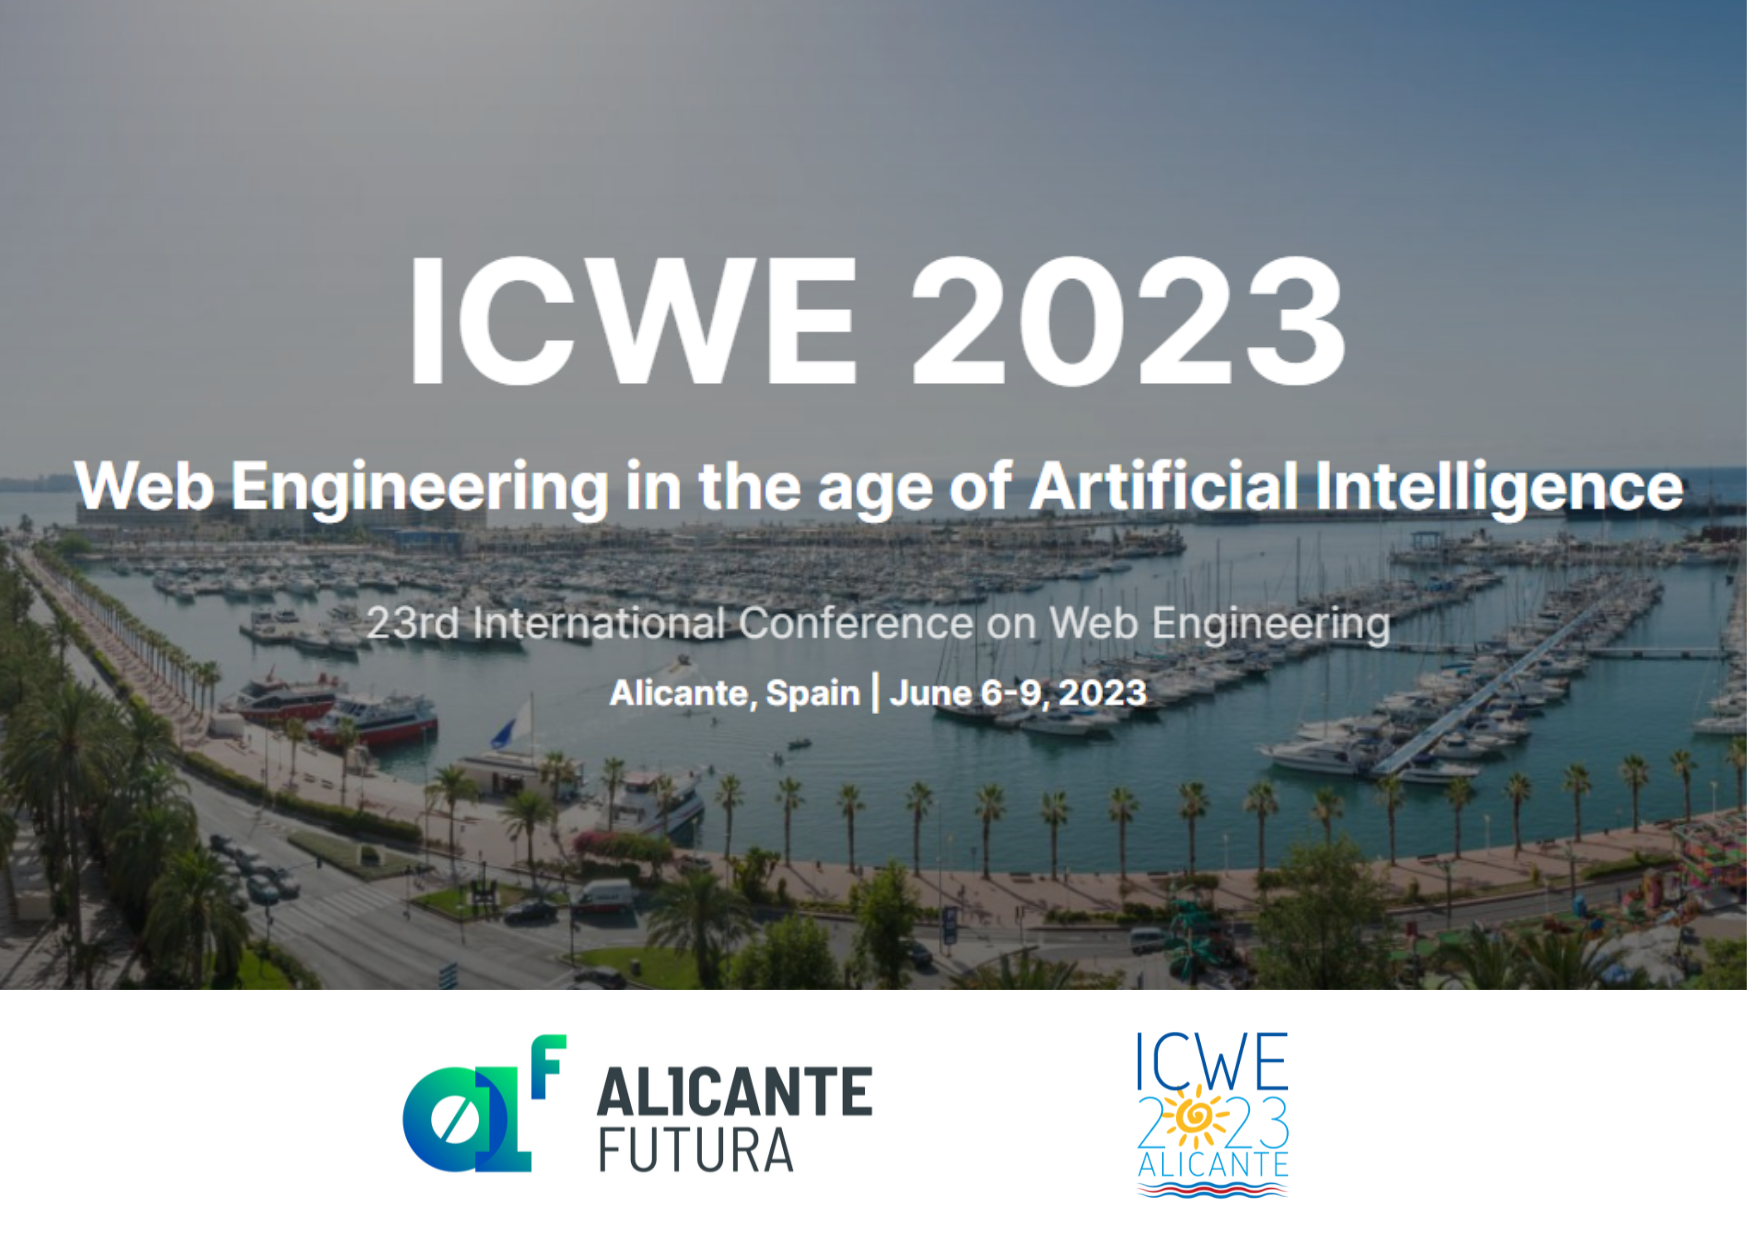 ¡Save the date¡ The International Conference on Web Engineering (ICWE) 2023 se celebra en Alicante